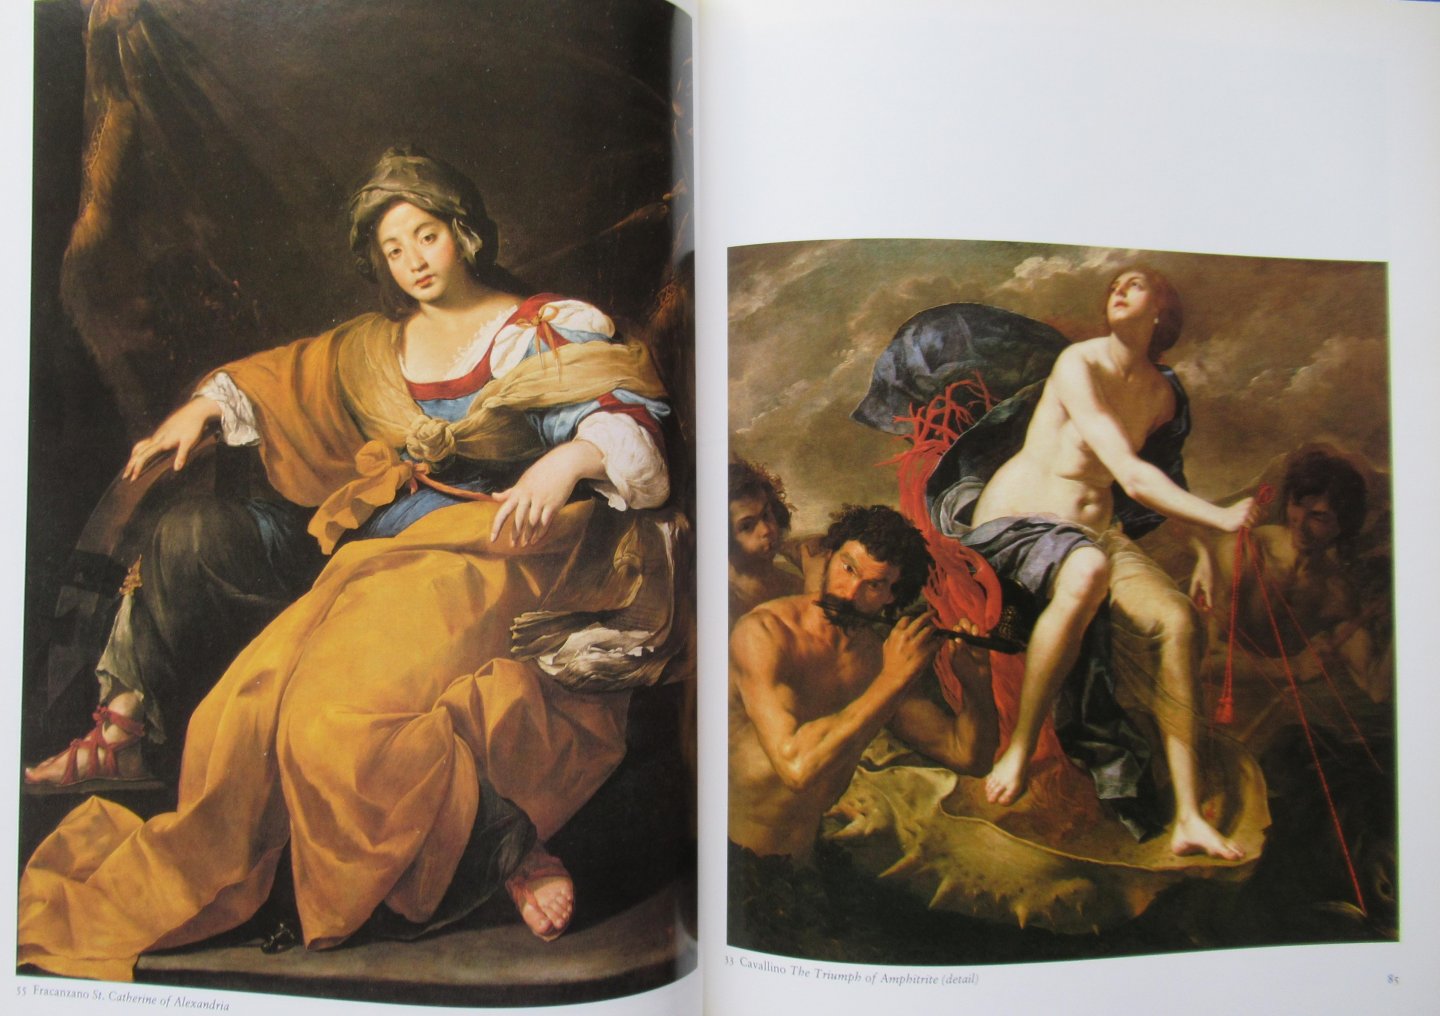 Whitfield,Clovis - Martineau, Jane (editors) - Painting Naples from Caravaggio to Giordano 1606 - 1705